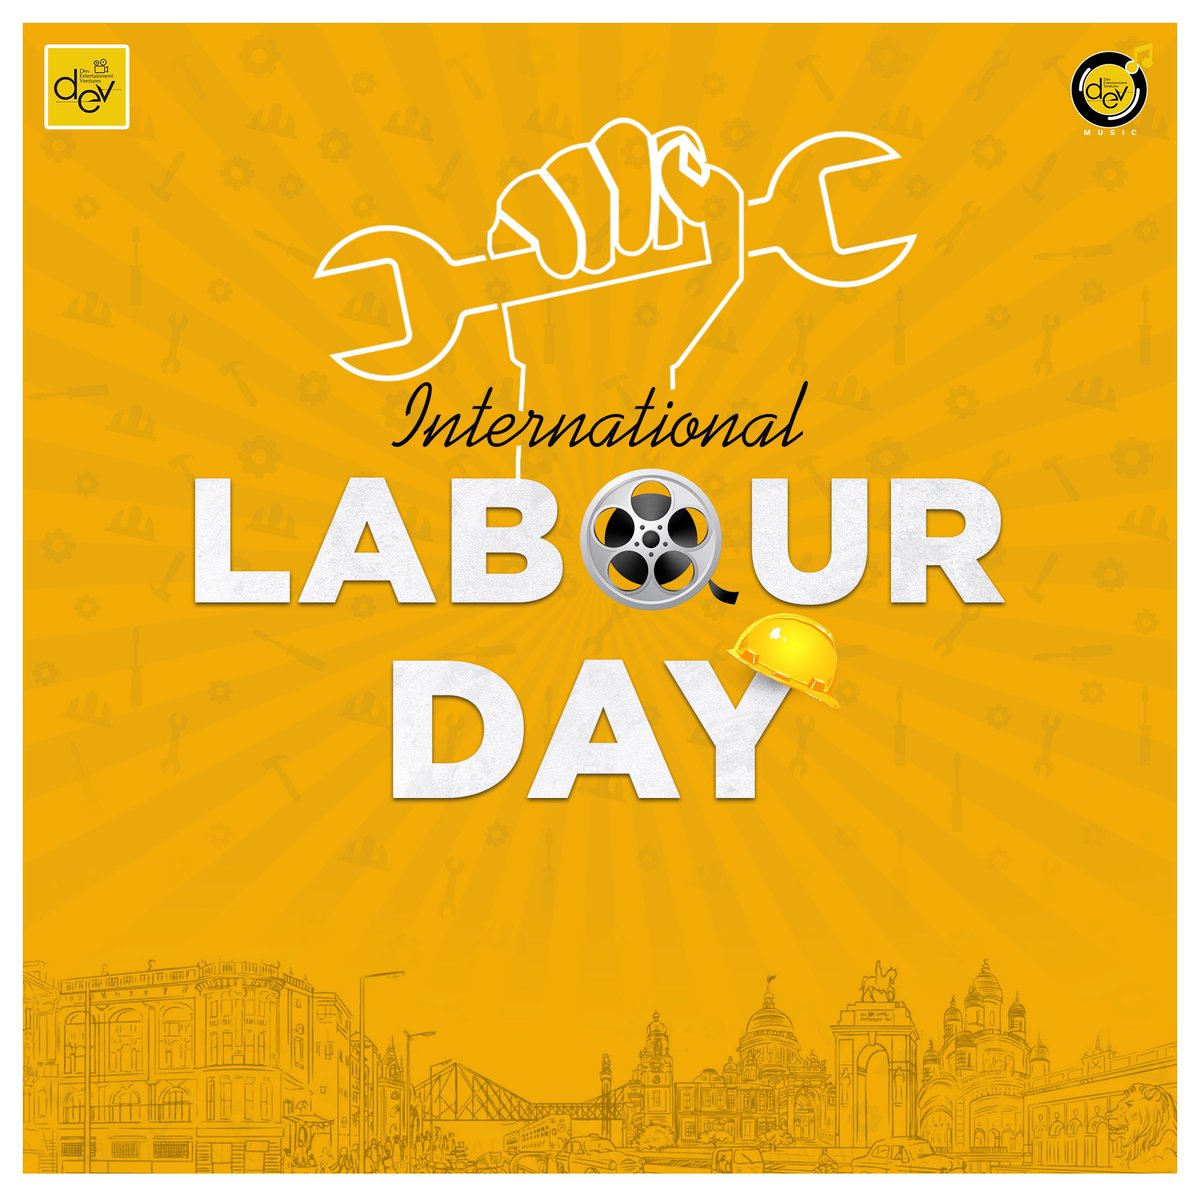 Uniting hands, shaping futures - Honoring the backbone of the society this International Labour Day. #InternationalLabourDay #HappyMayDay